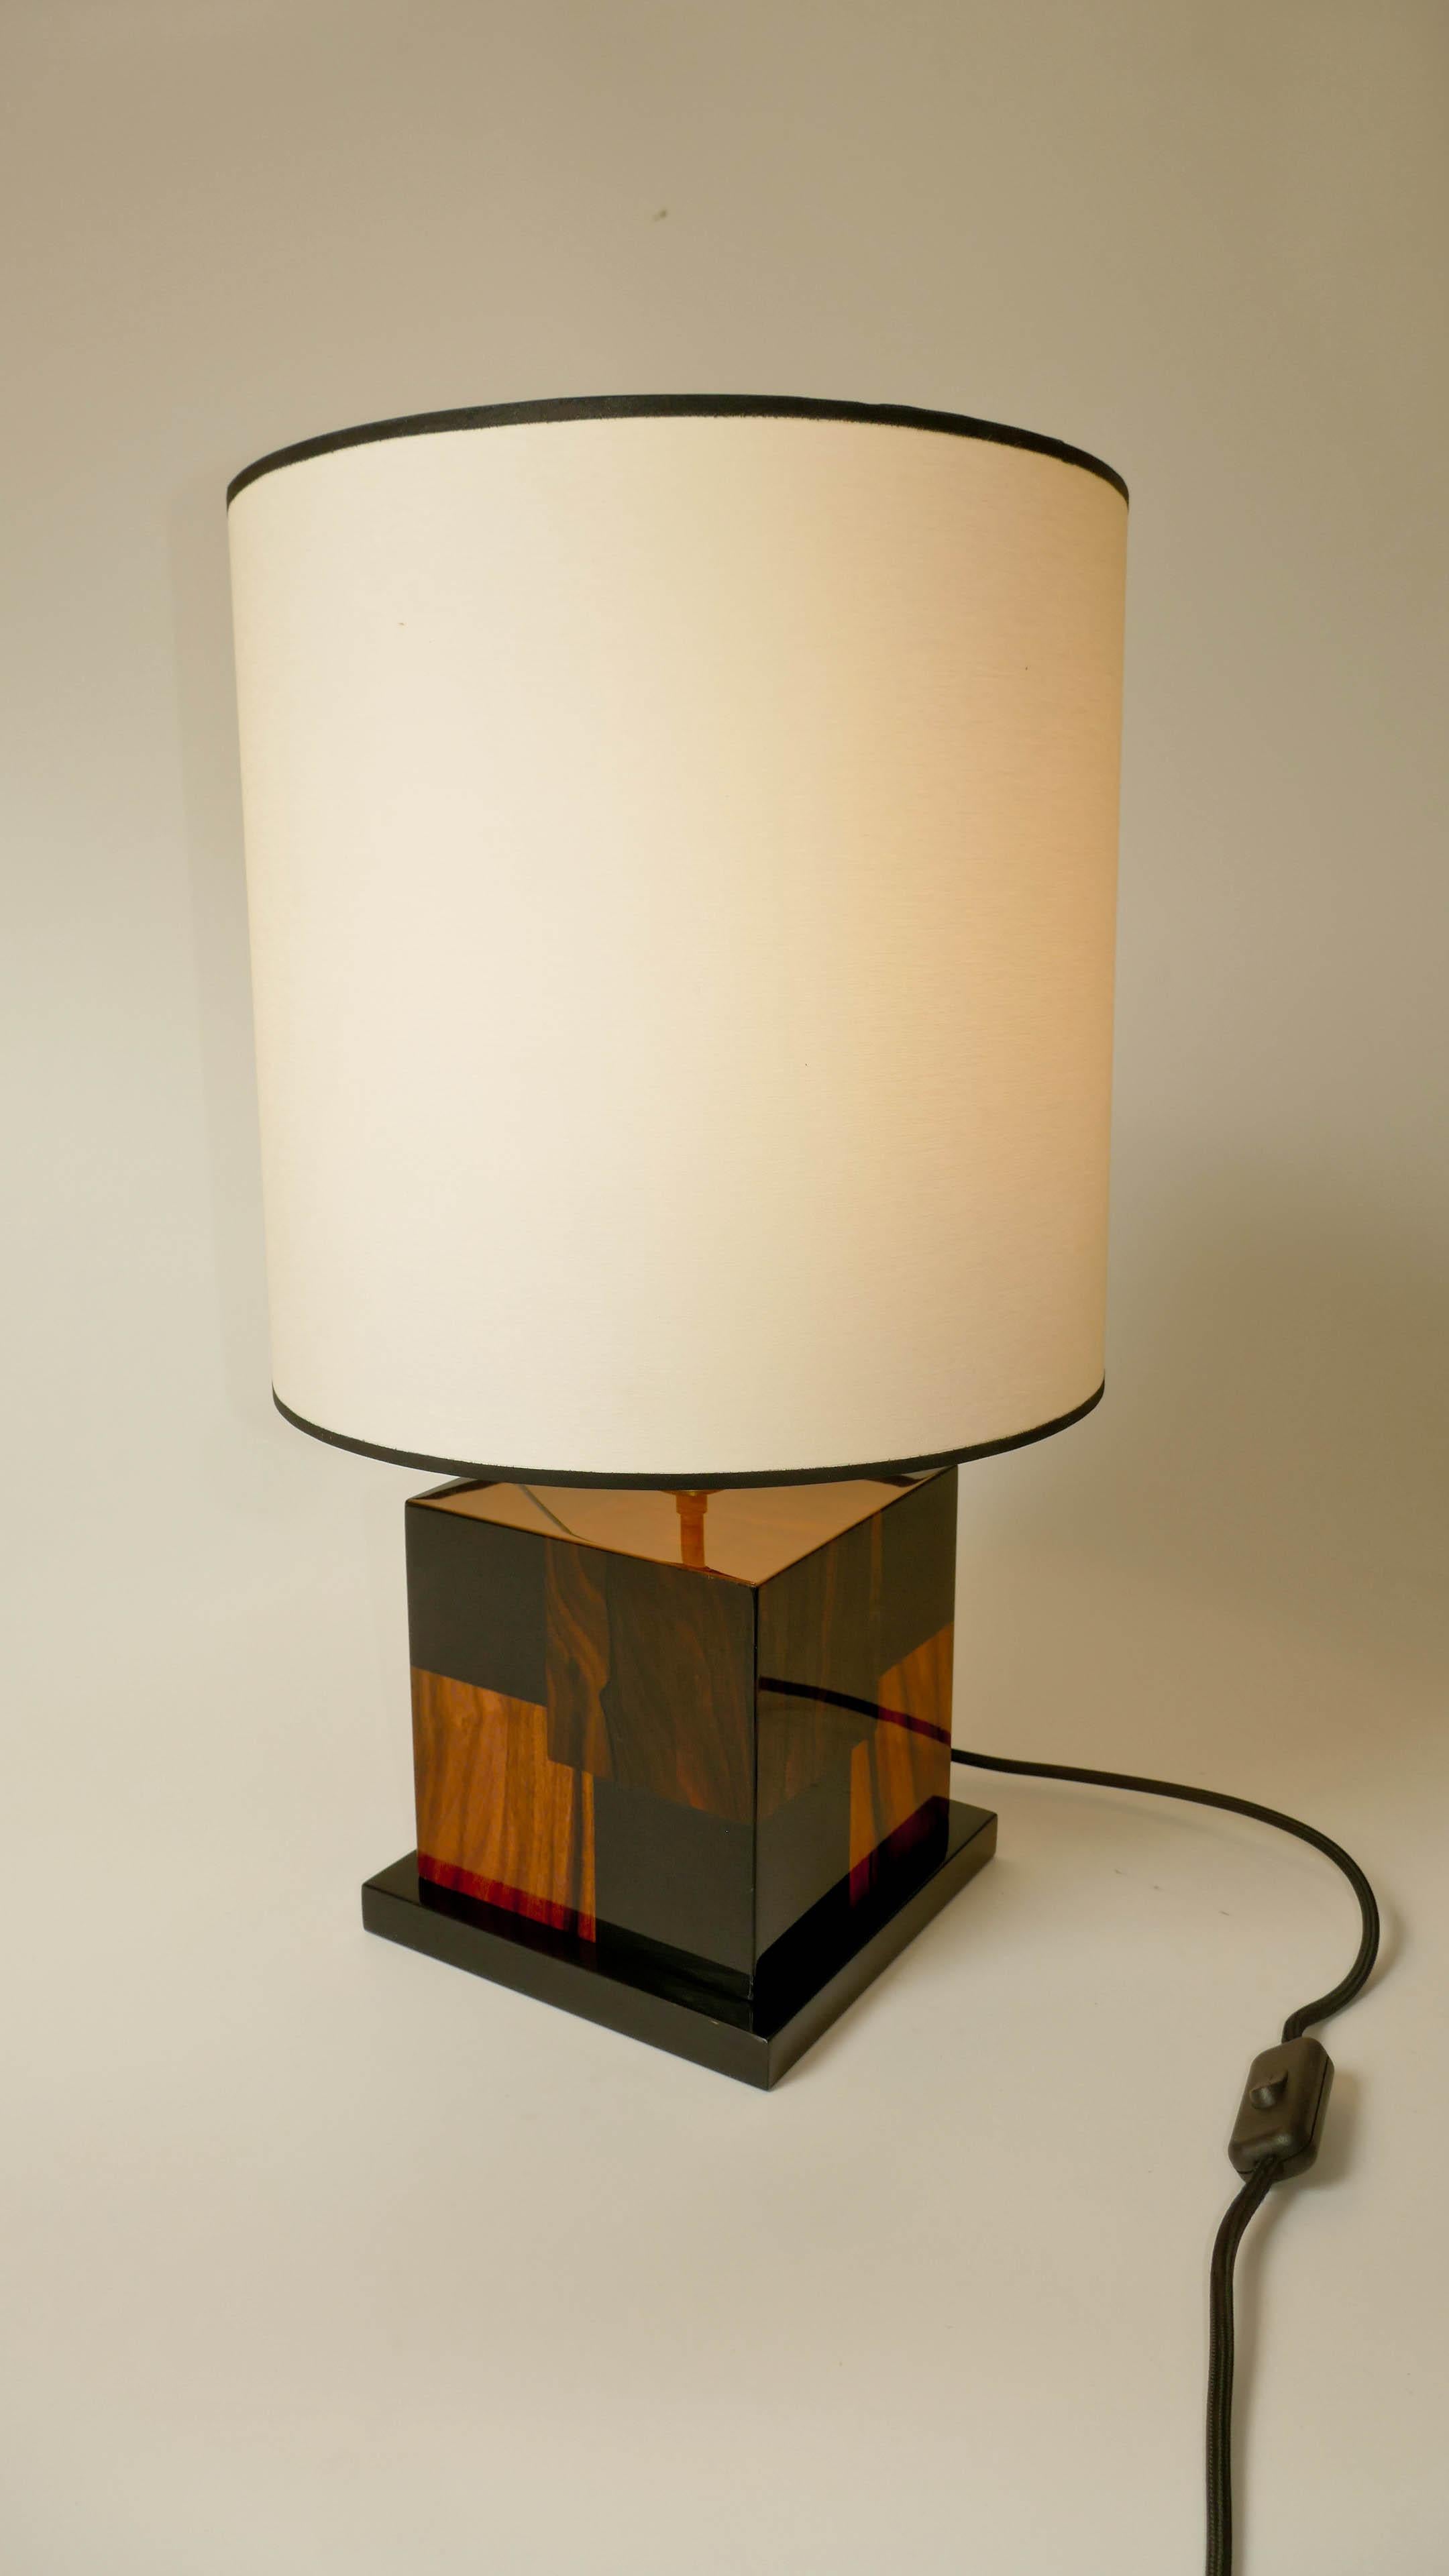 Table lamp in tinted black sycamore, ziricote and santos woods marquetry.
Carefully build in our Parisian workshop this lamp has a kinetic effect using the different colors to create an impression of deepness. The lamp is varnished. The bulb is a